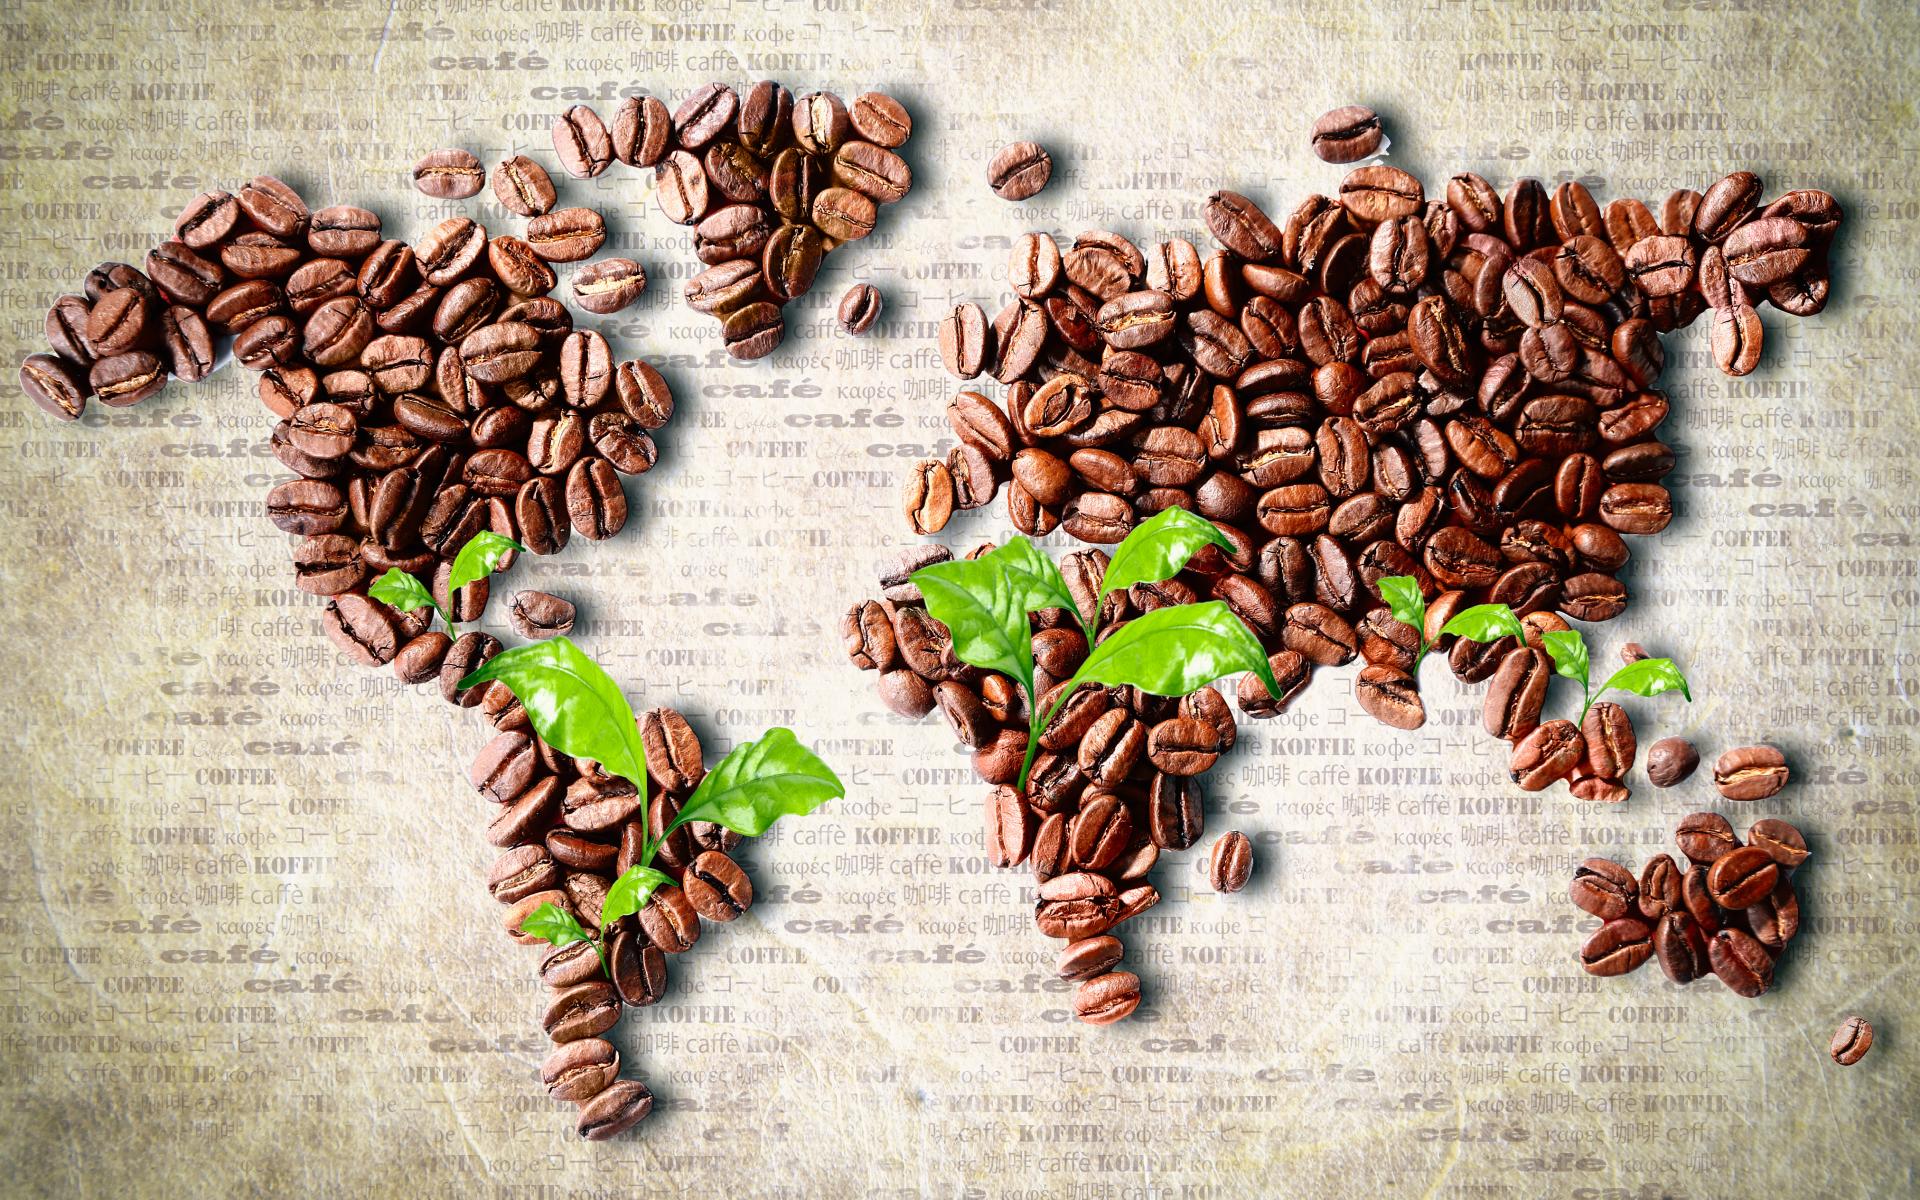 food, Drinks, Coffee, Maps, Continents, News, Paper, Leaves, Art, Artistic, Beans Wallpaper